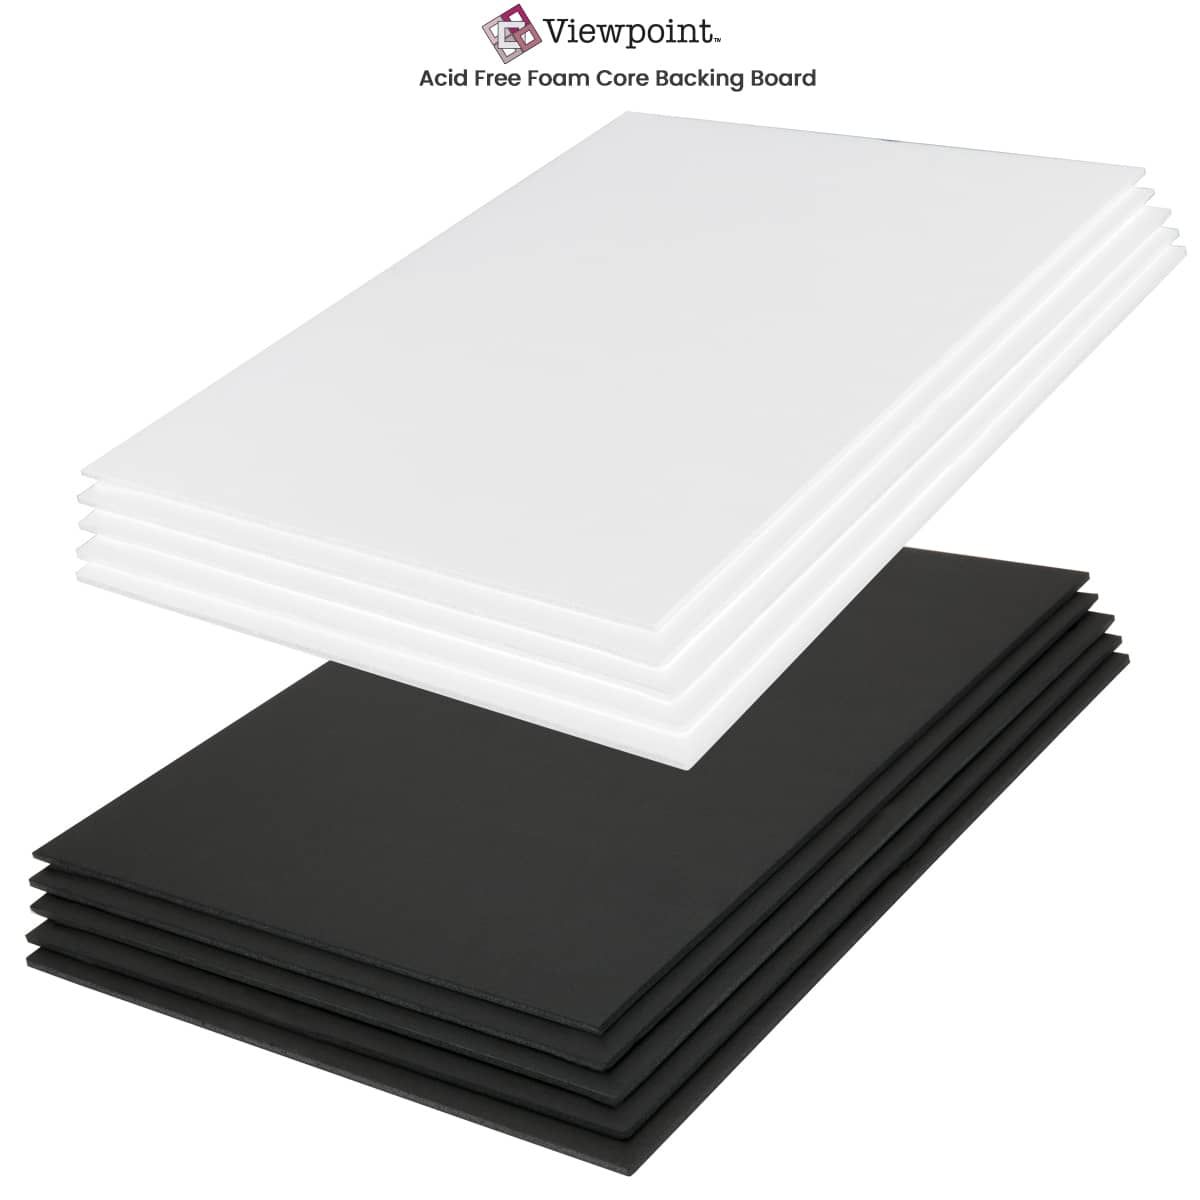 1/8" Thick Viewpoint Acid-Free Foam Backing 5-Pack 16x20" White 